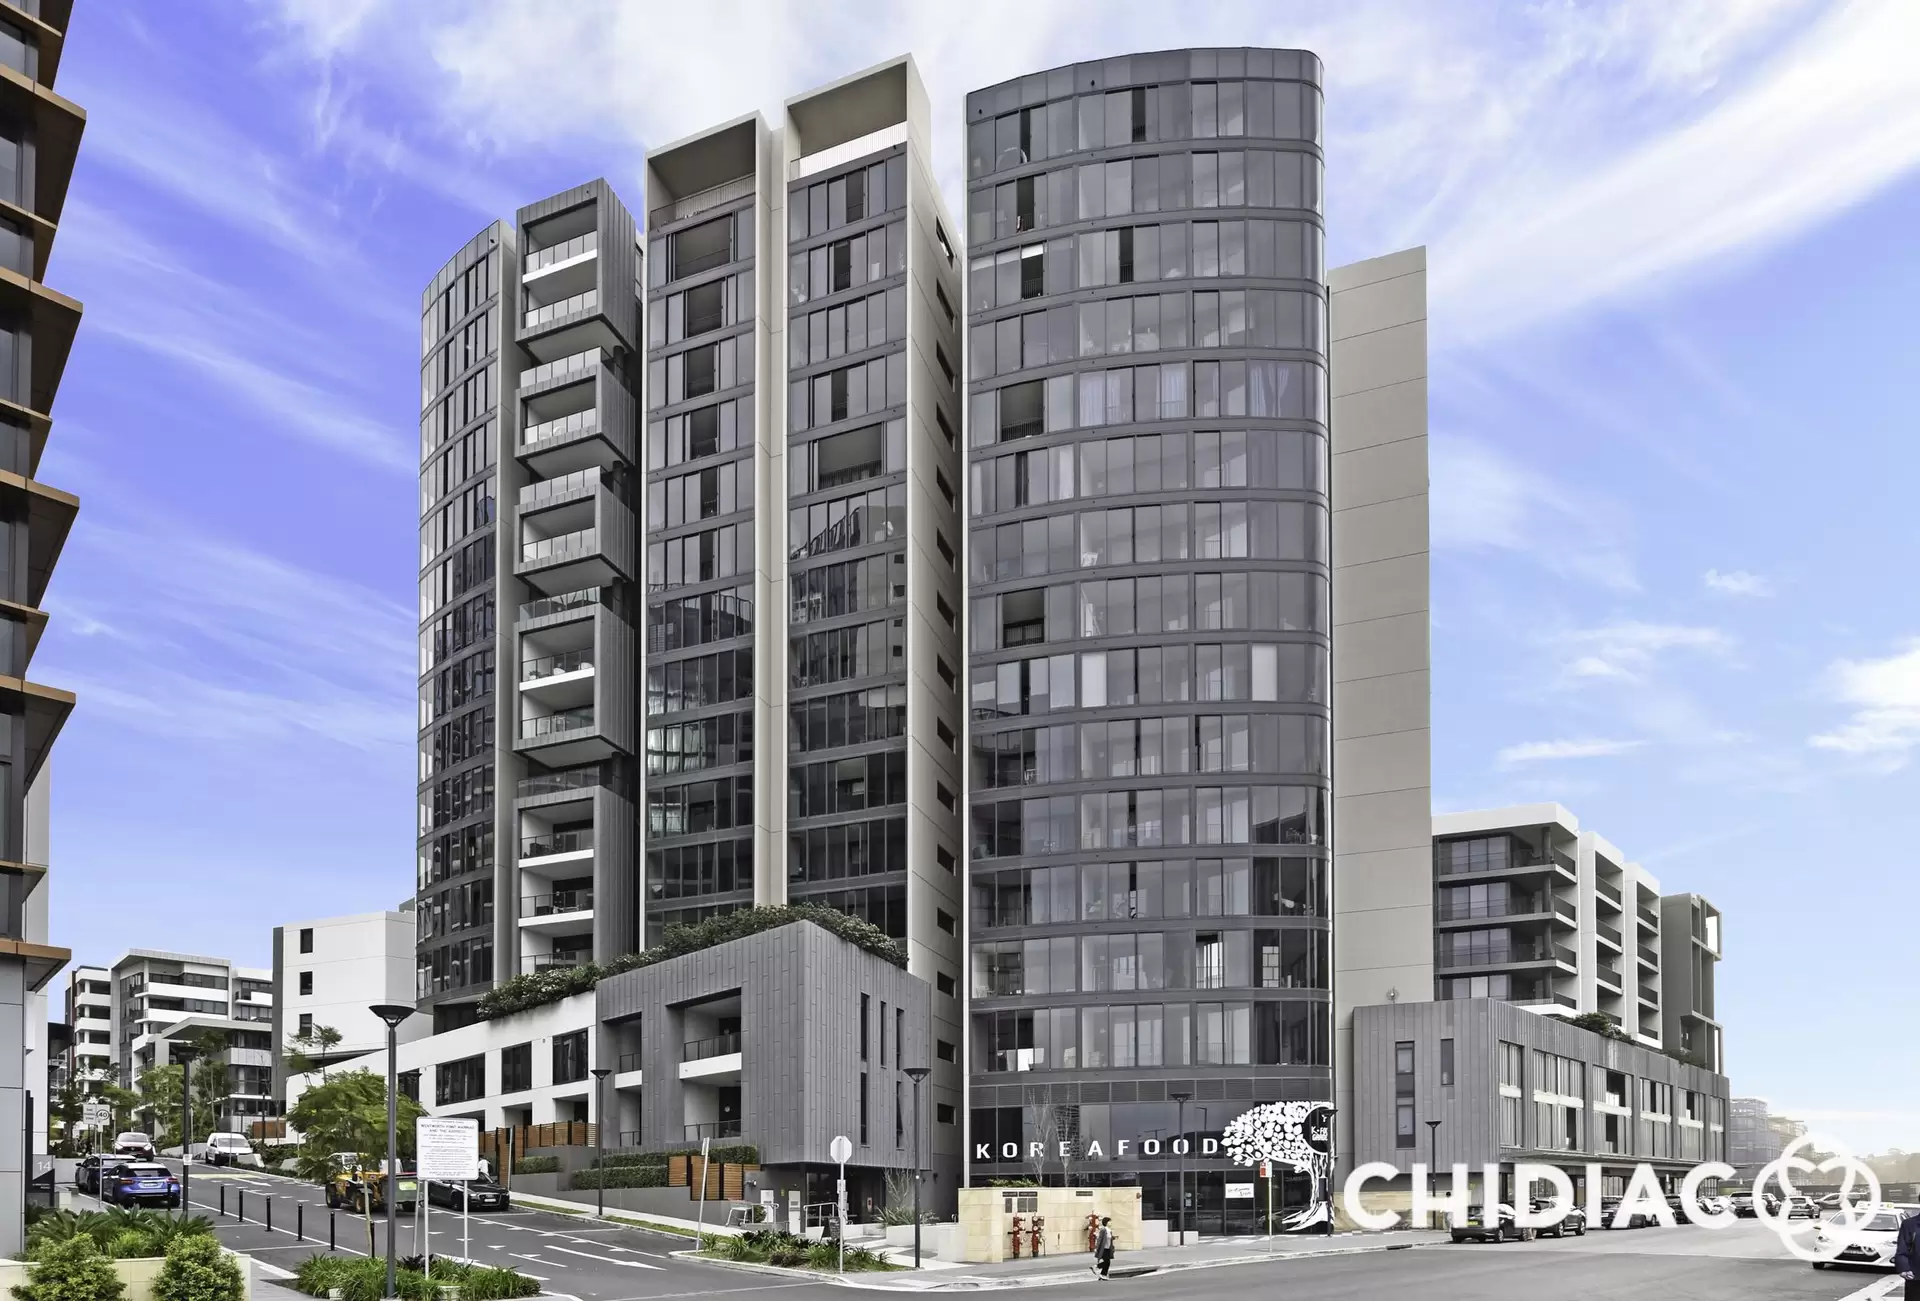 1005/10 Burroway Road, Wentworth Point Leased by Chidiac Realty - image 1